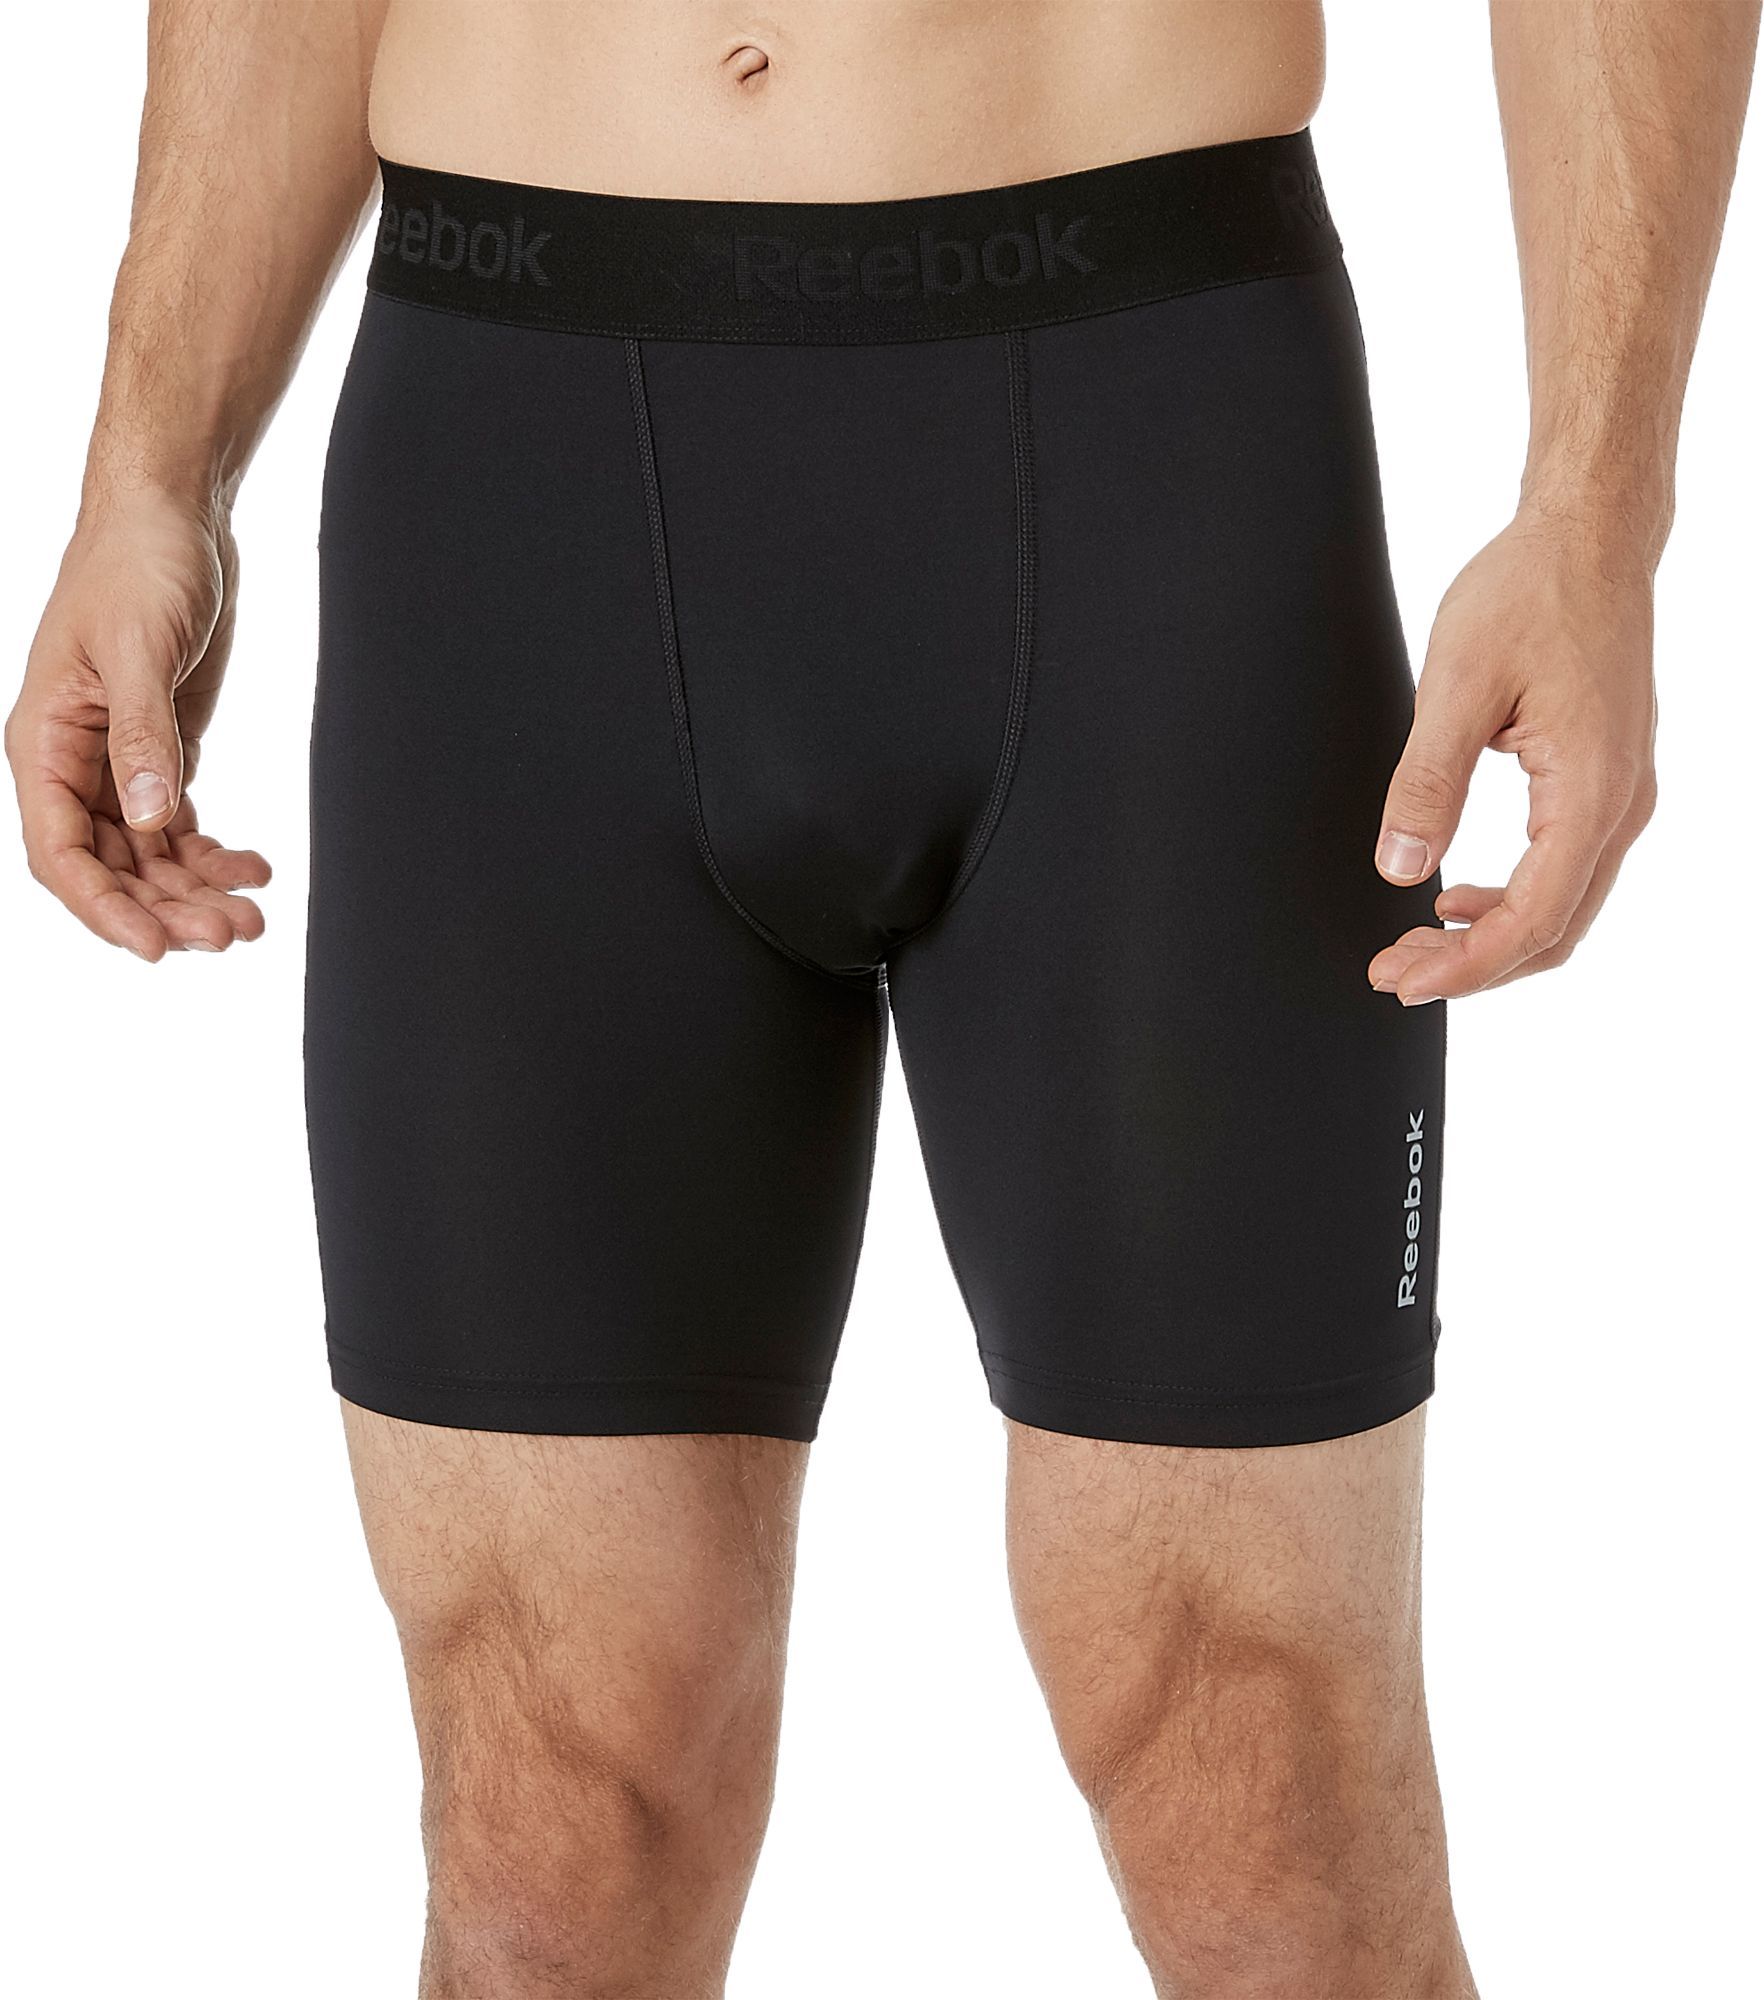 extra long compression shorts